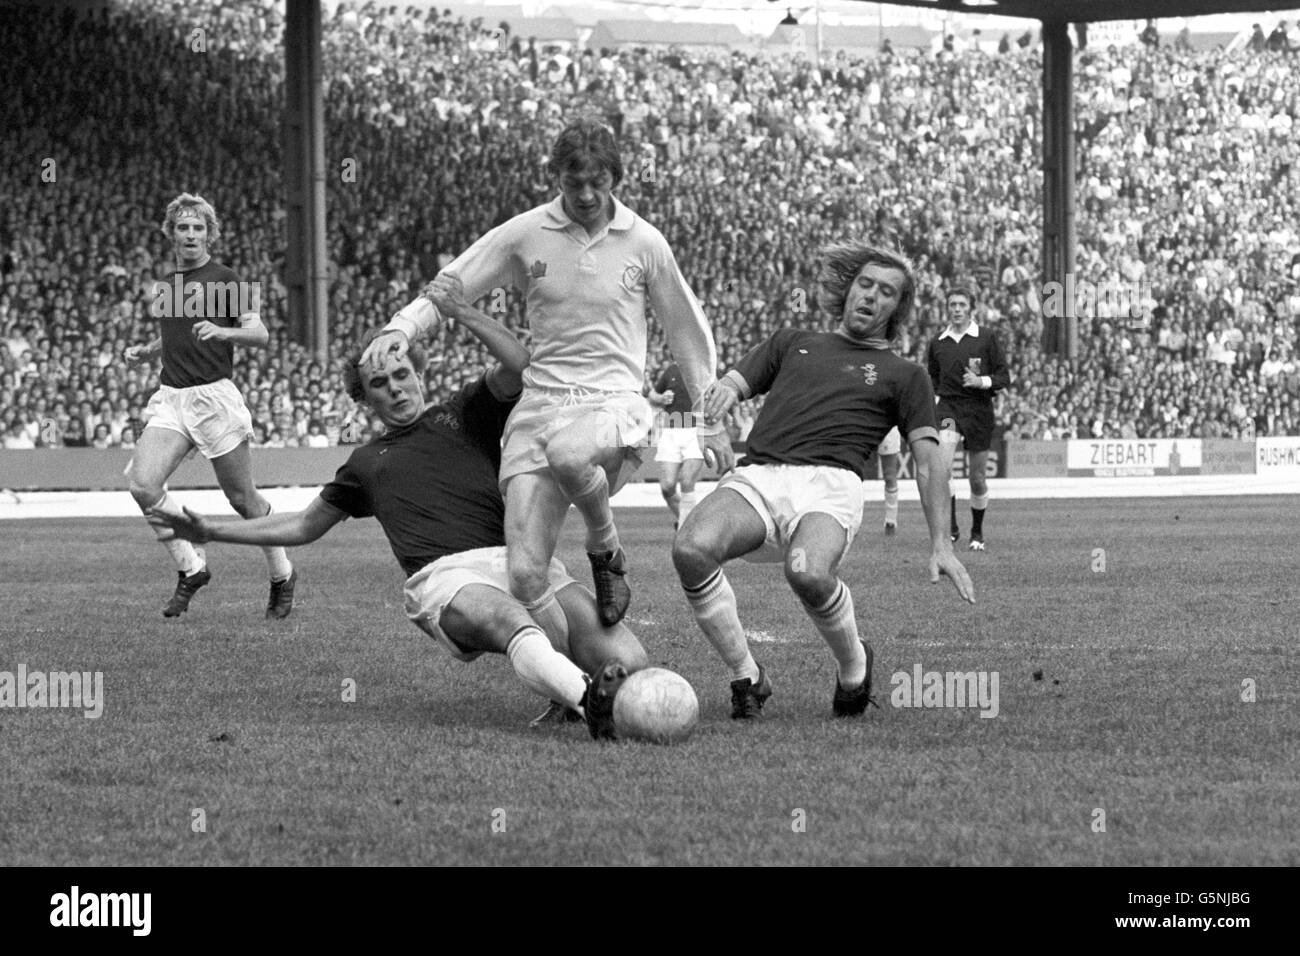 Allan Clarke, the Leeds United forward, has it all his own way for the moment, as he creates havoc with Burnley, whose defender Keith Newton, is on the right. Burnley won the match 2-1. Stock Photo